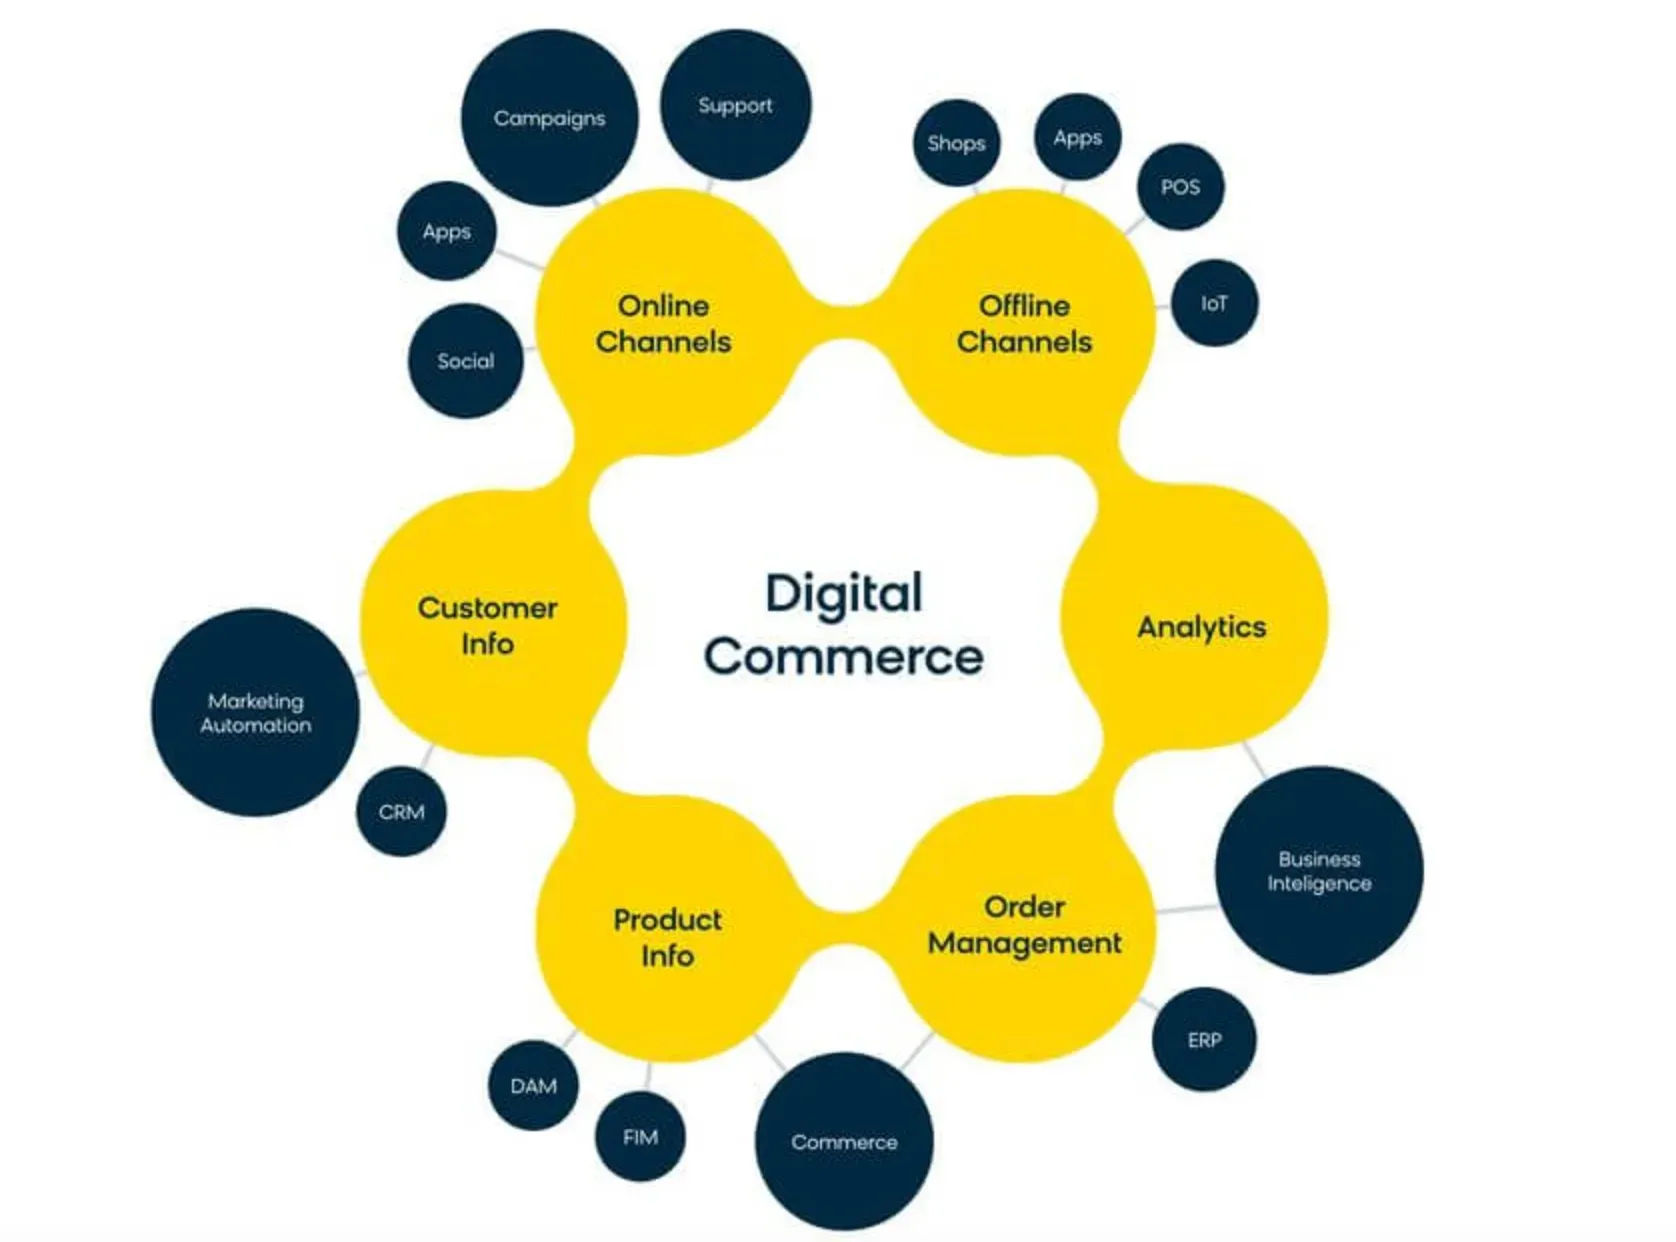 What Does Digital Commerce Include?